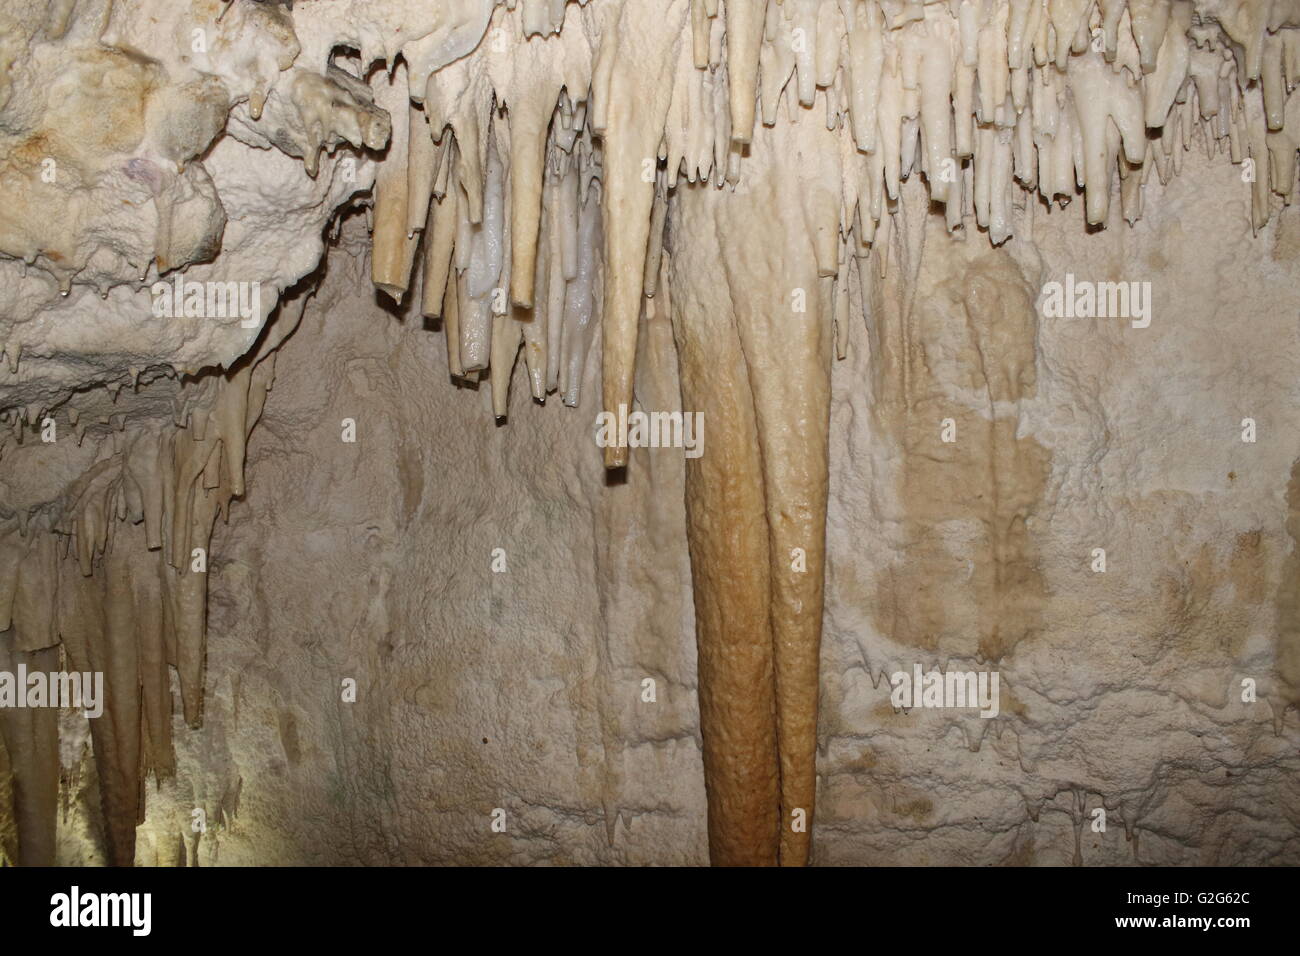 Stalactites with tips broken off Stock Photo